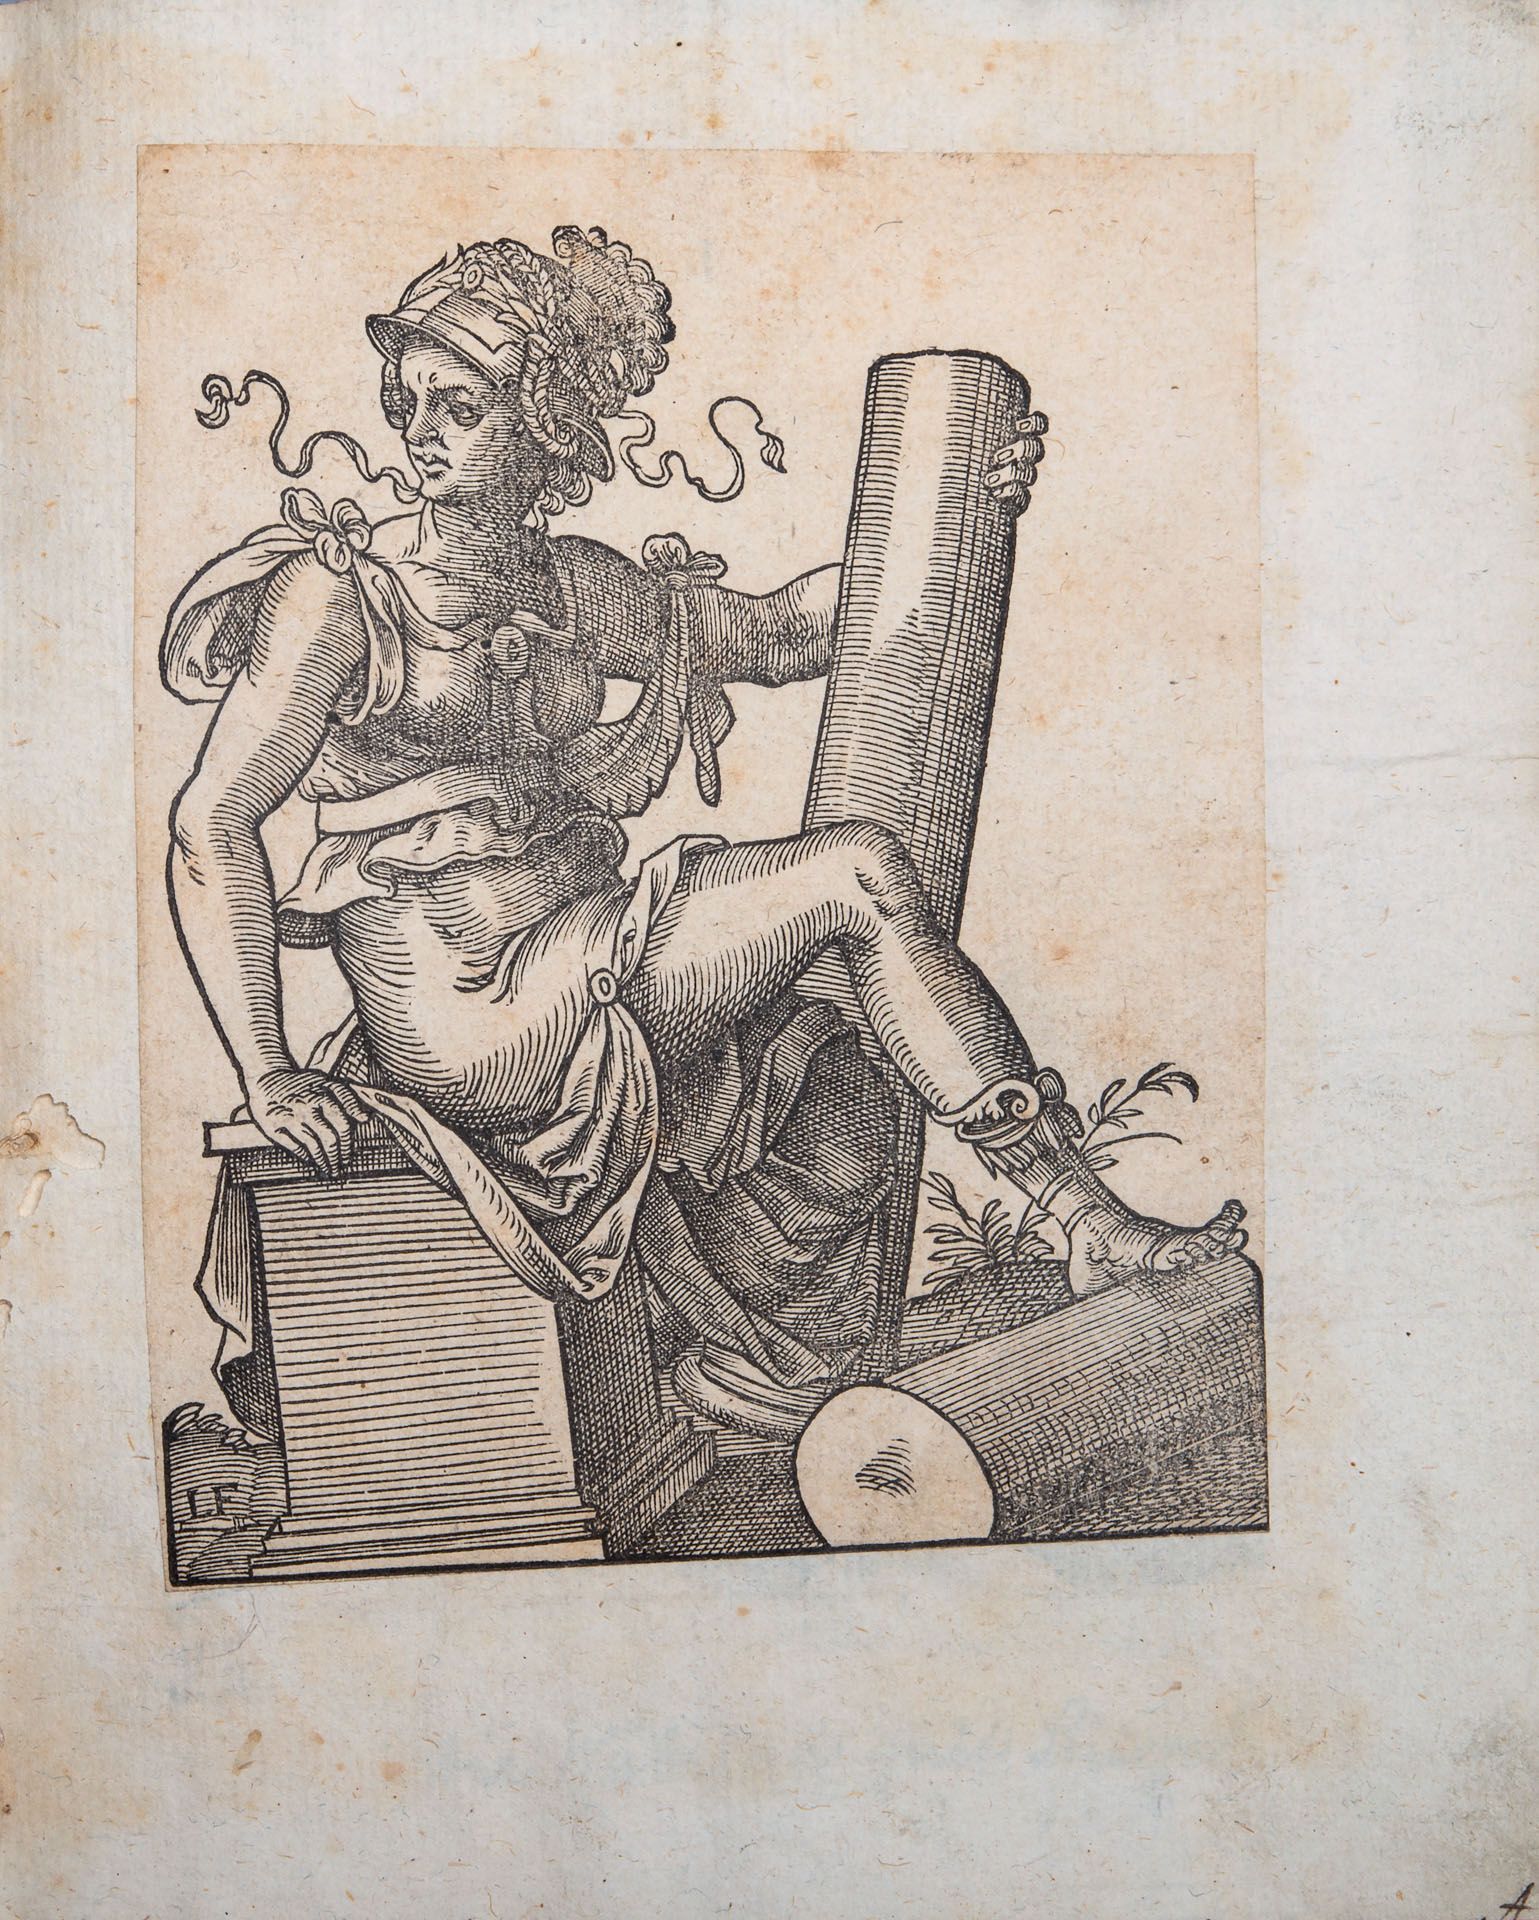 Jost Amman (1539-1591), An Album of 32 Original Engraving from the 16th Century - Image 3 of 7